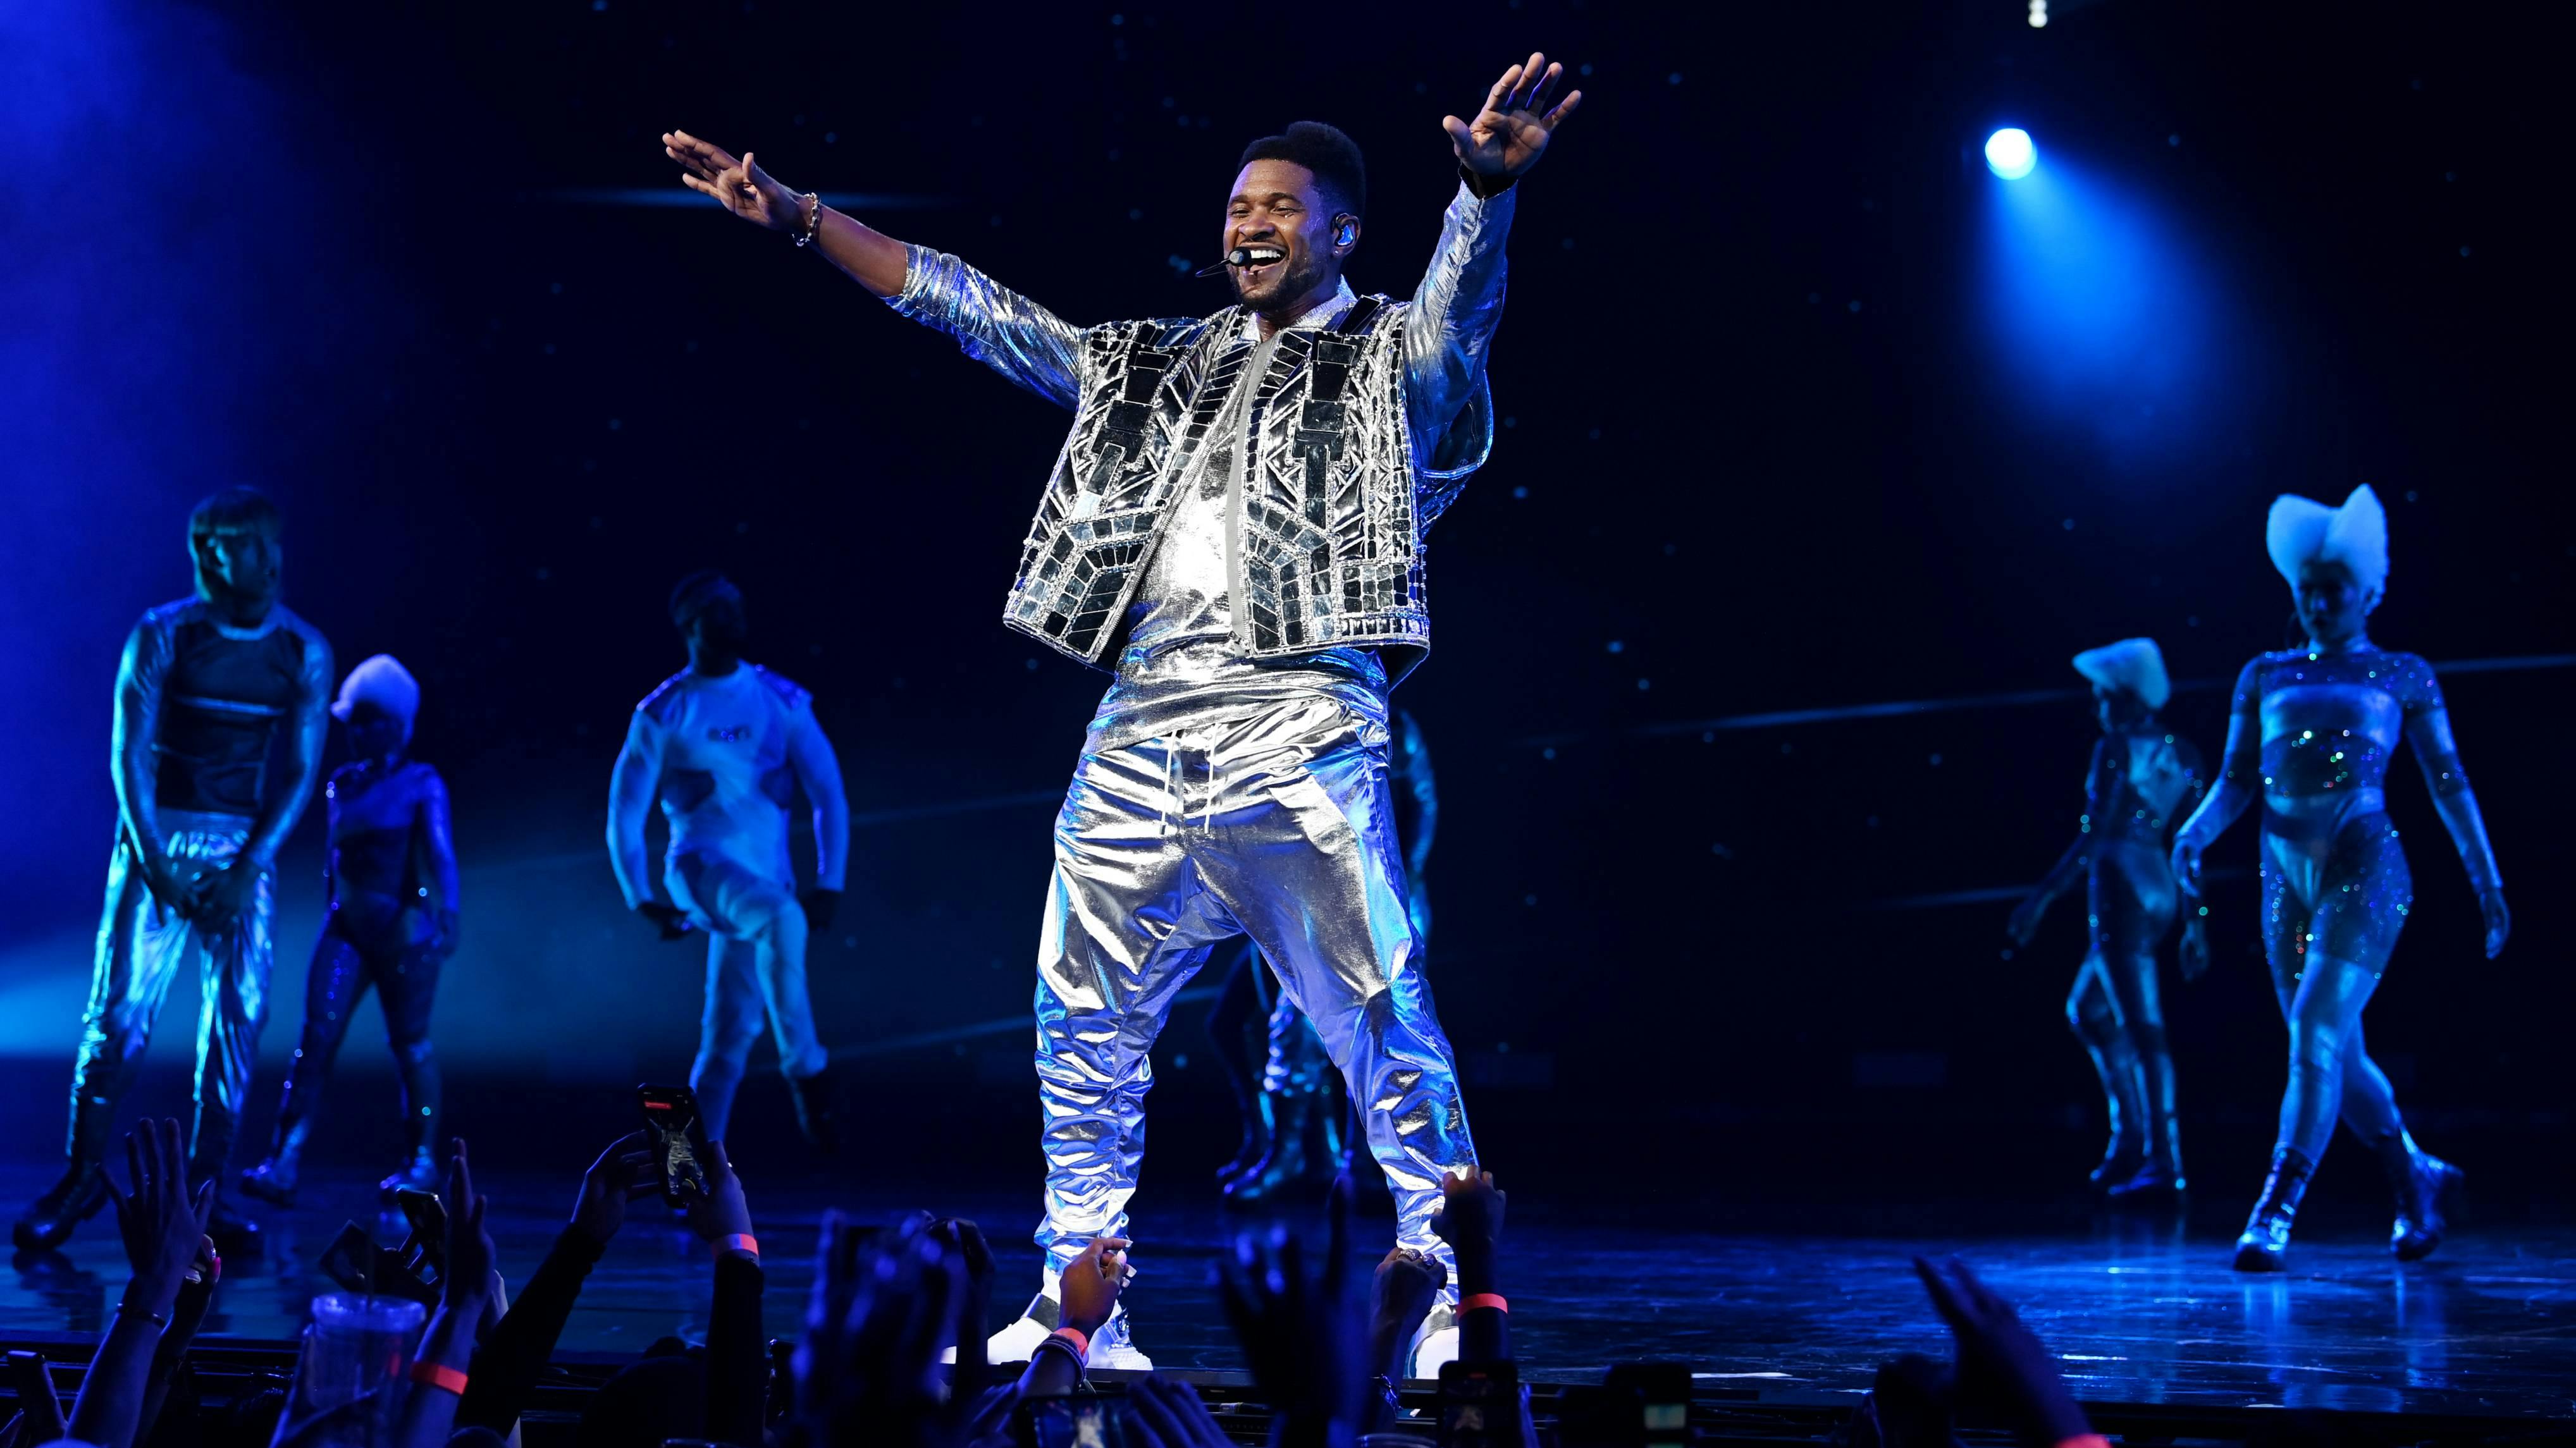 This year's Super Bowl halftime show will be performed by Usher. 